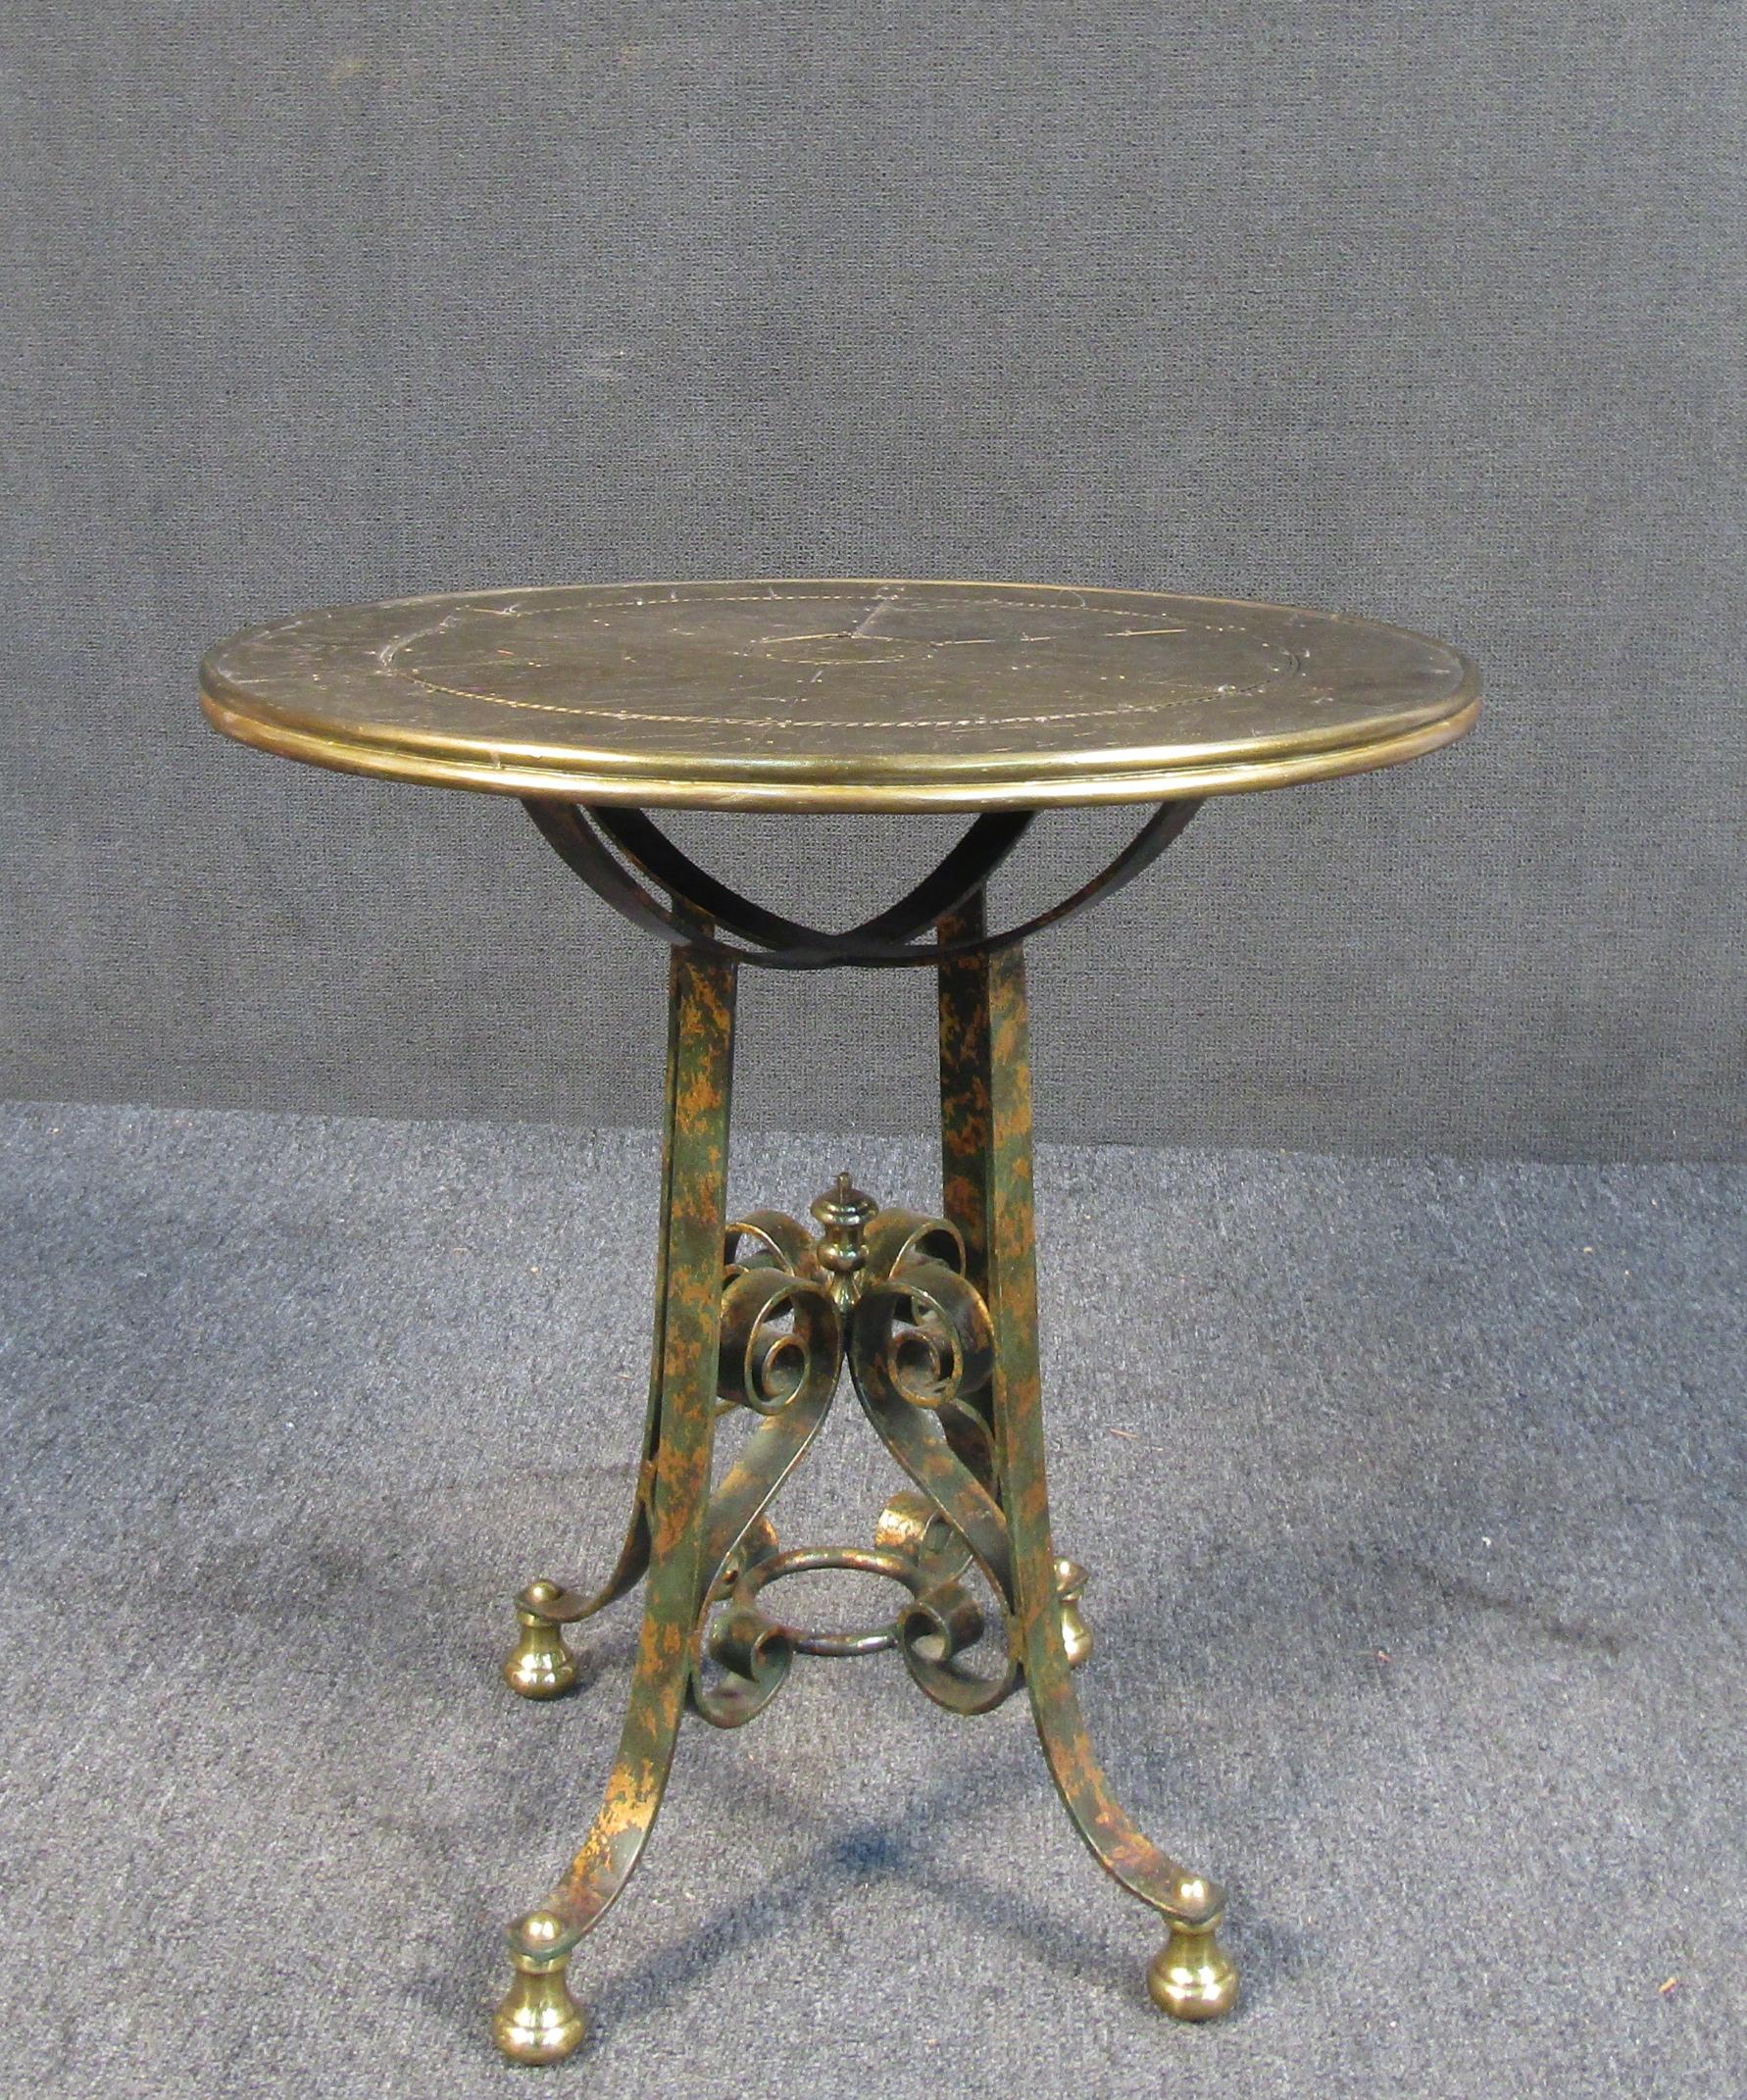 This unique metal table features asian inspired top, as well as ornate rolled metal accenting. The gold finish gives this piece a sophisticated look perfect for any far eastern styled home or office.

Please confirm item location (NJ or NY).